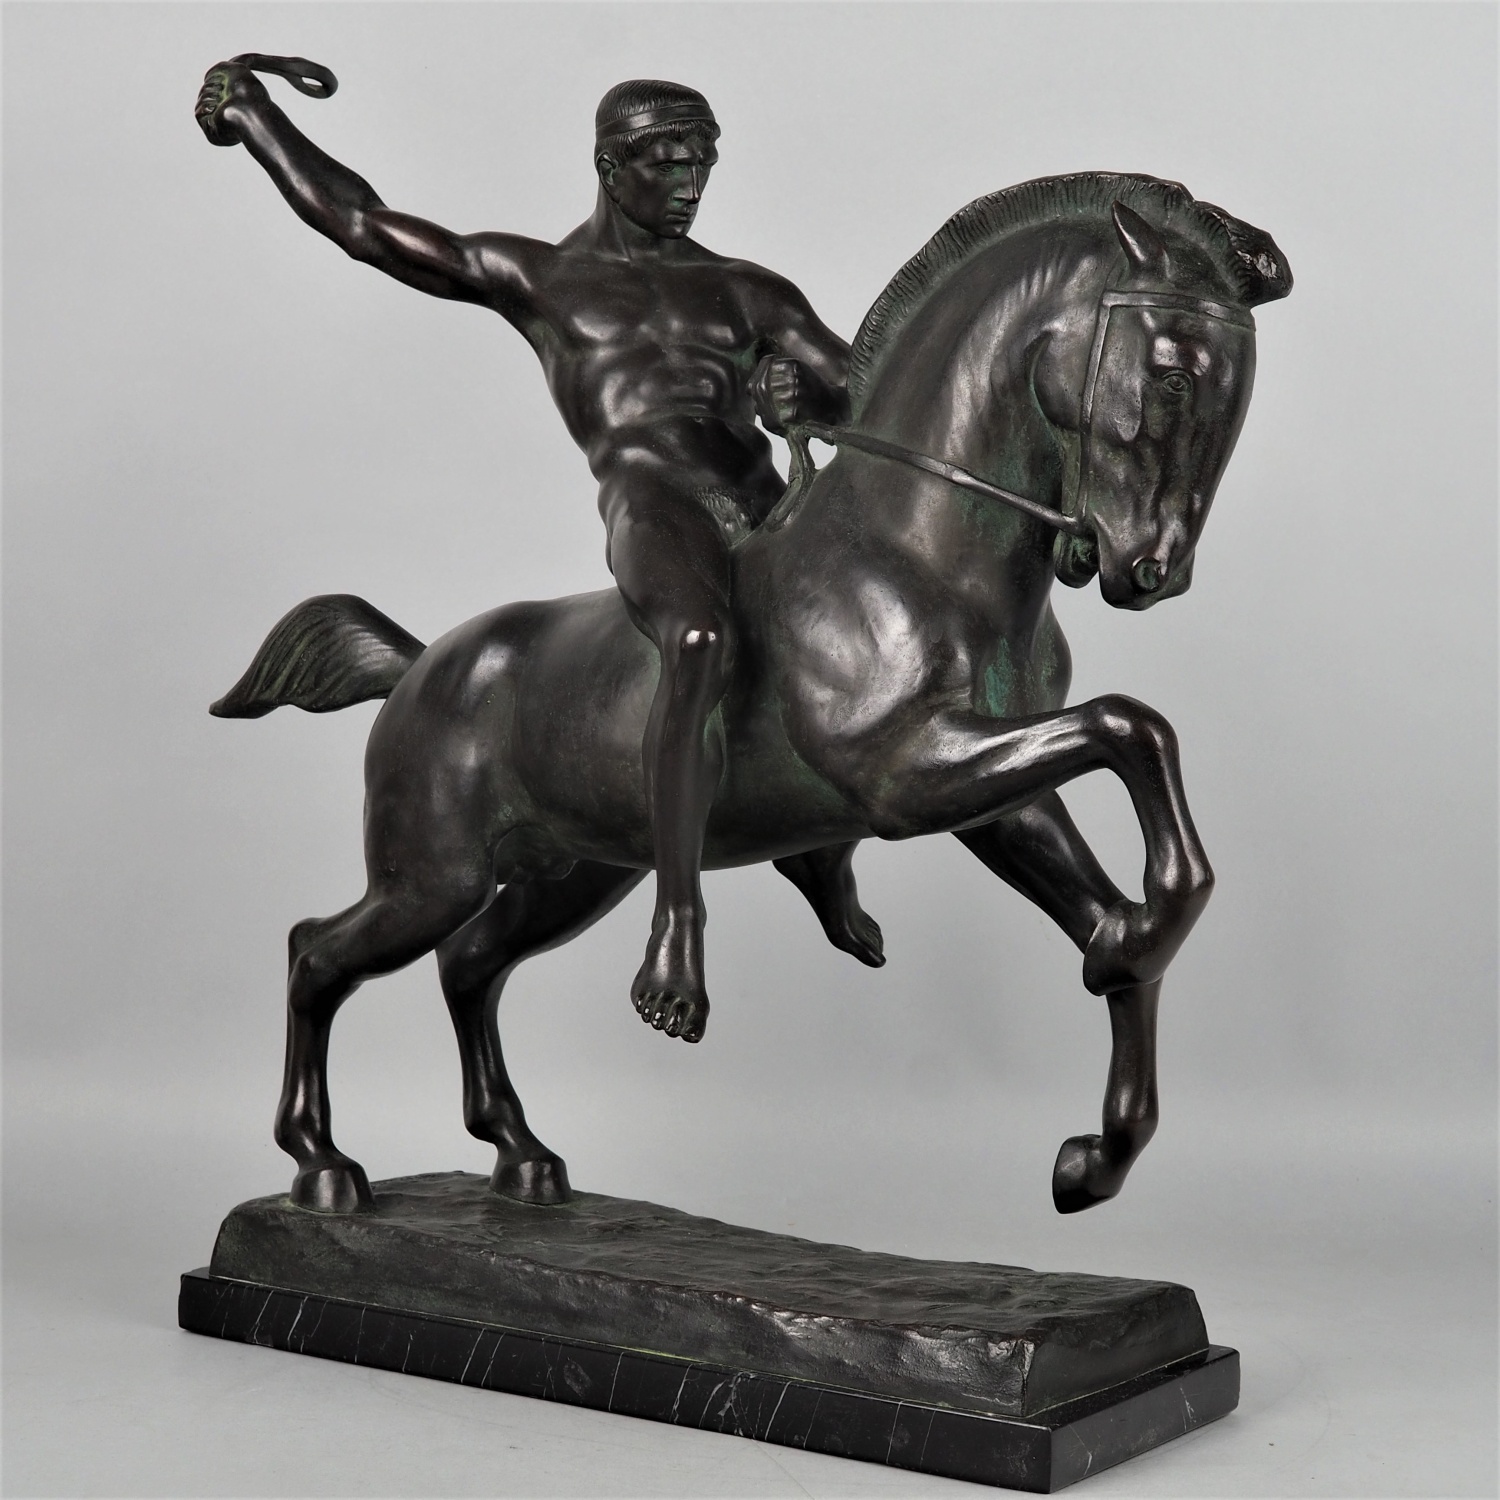 Heroic bronze of a warrior on the back of a galloping horse by Berthold Stölzer 1930s.